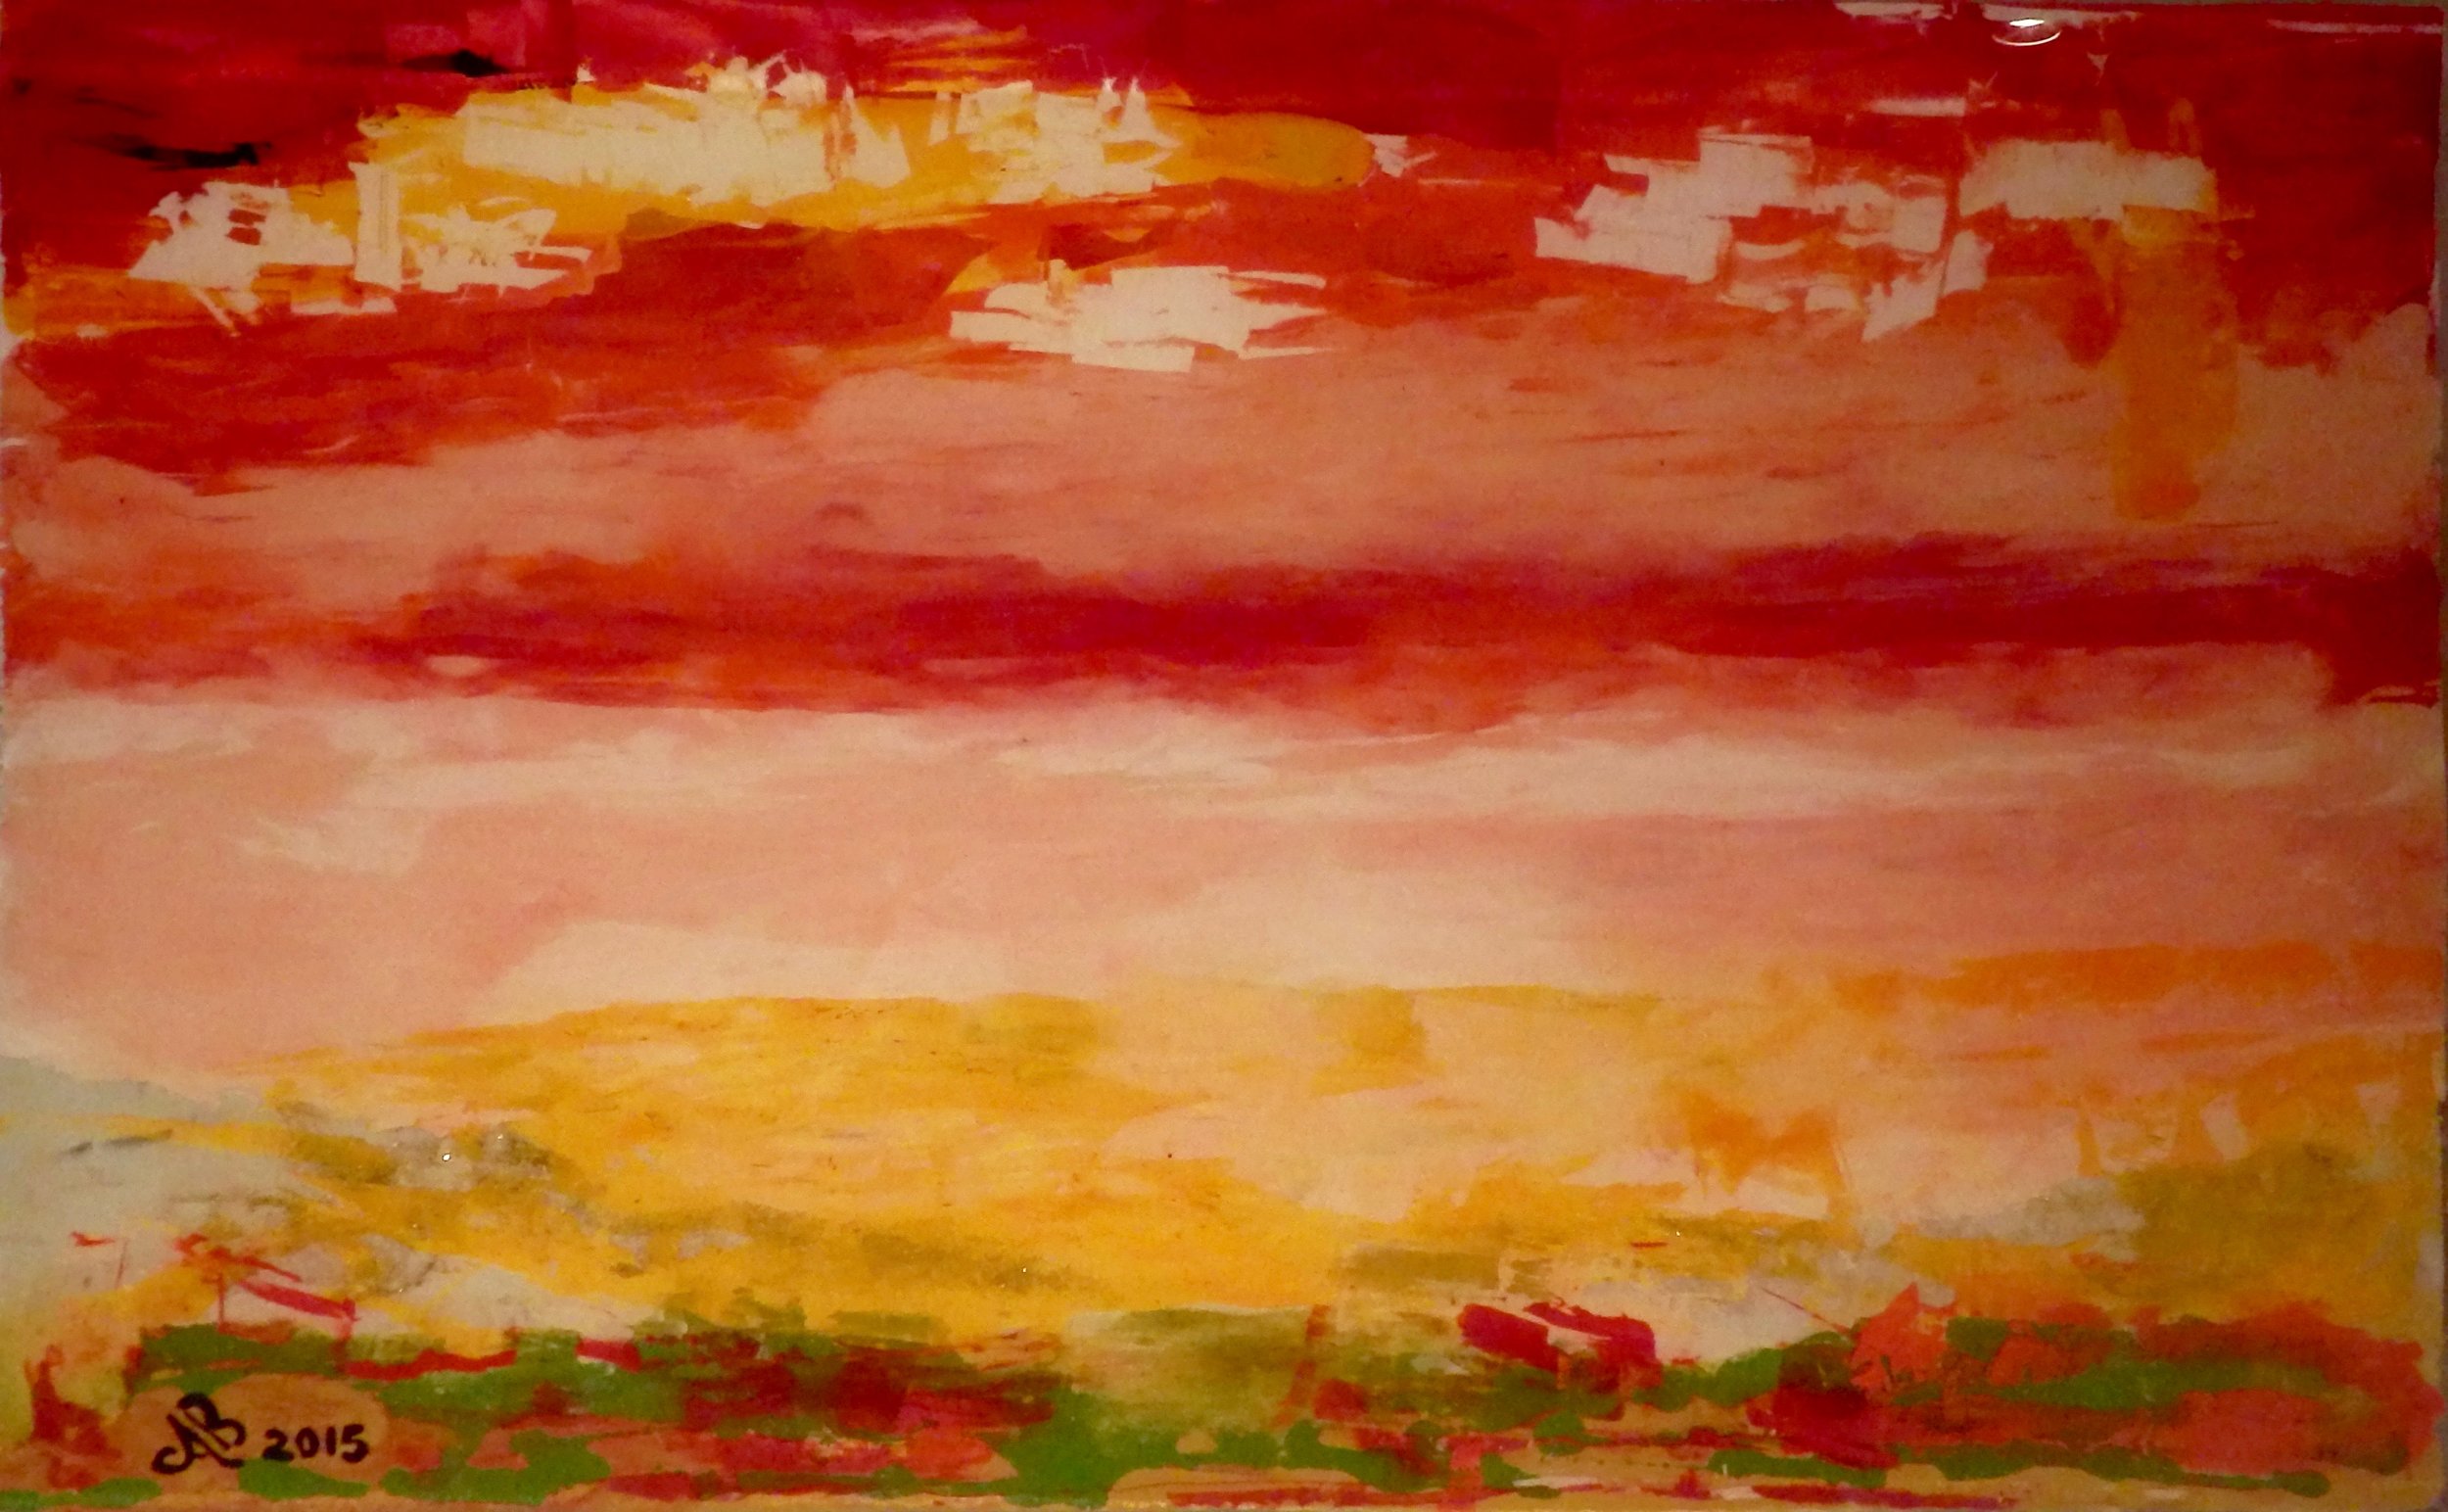   ALBERTA SUNSET - Reverse painting on tempered glass   53 x 83 cm . 21 x 33 in  